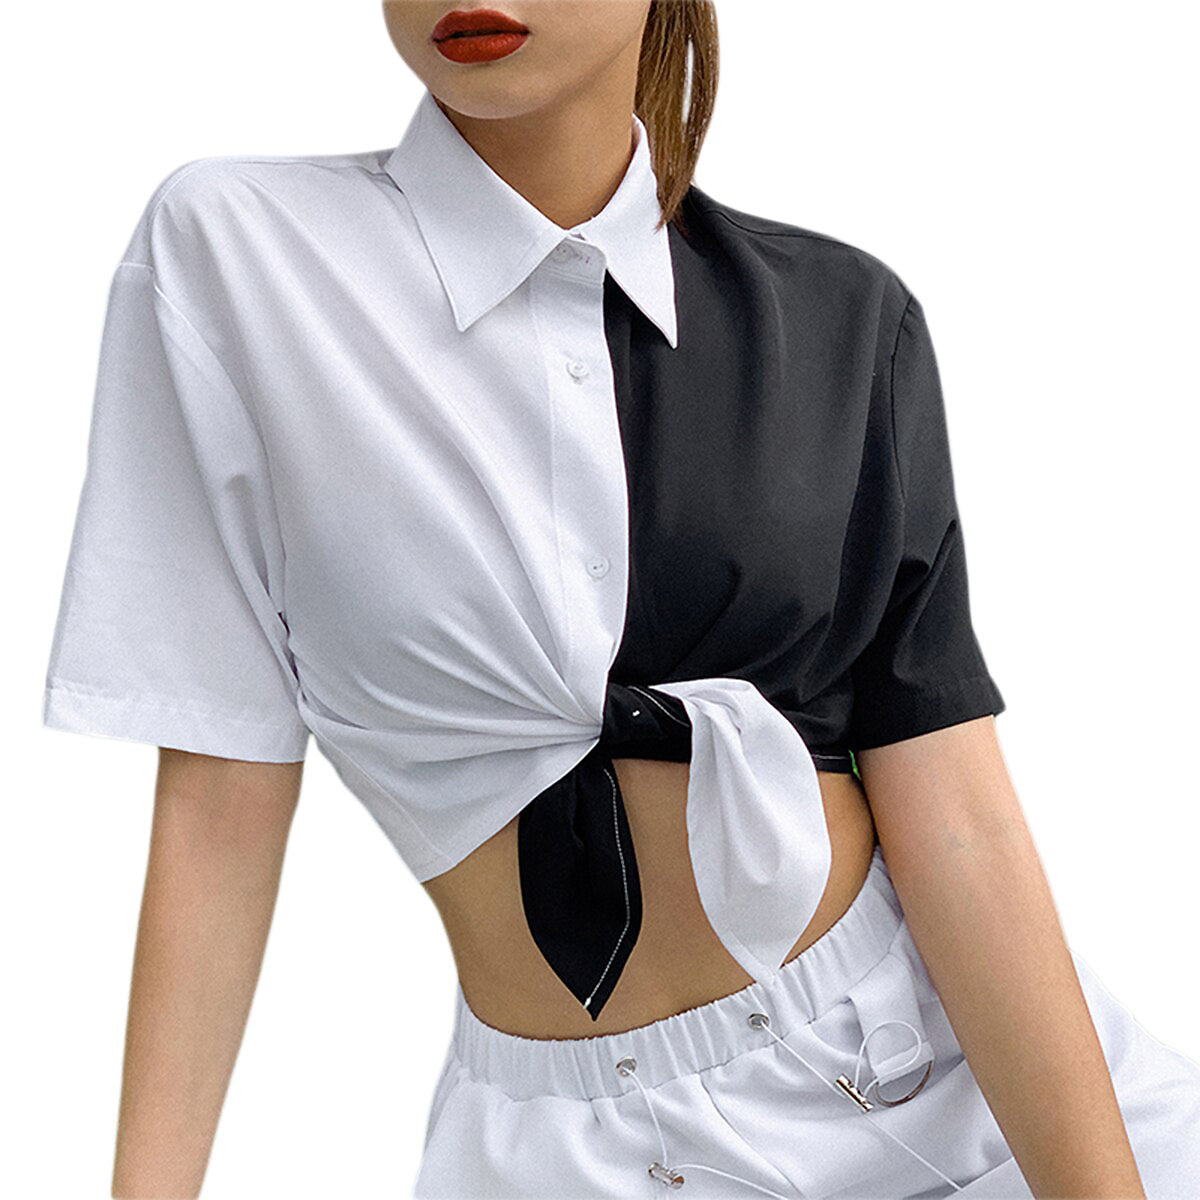 Women S Cropped Half Black Half White Dual Tone Shirt Black And White Goth Shirt Contrast Two Tone Top Clothing Women S Clothing Vigzer Co Il